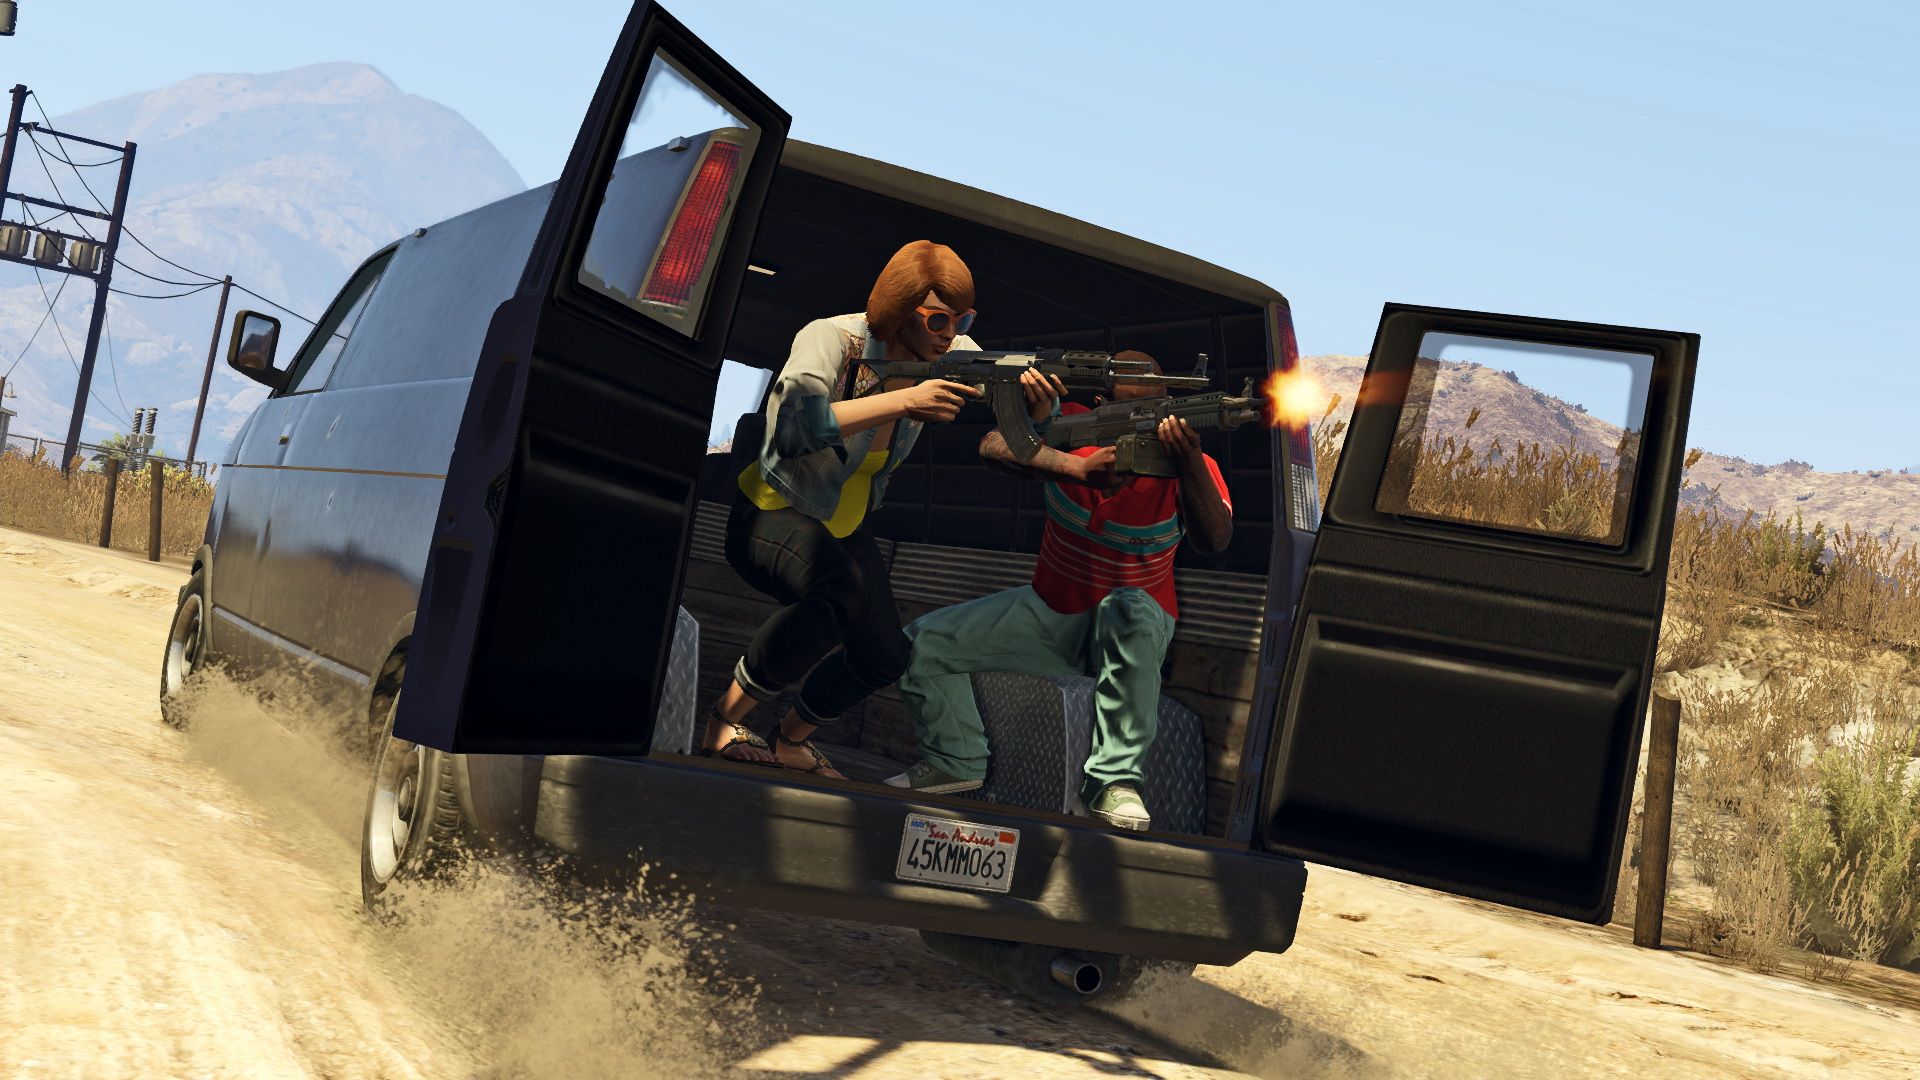 Check Out These New GTA 5 Xbox One PS4 PC Screenshots